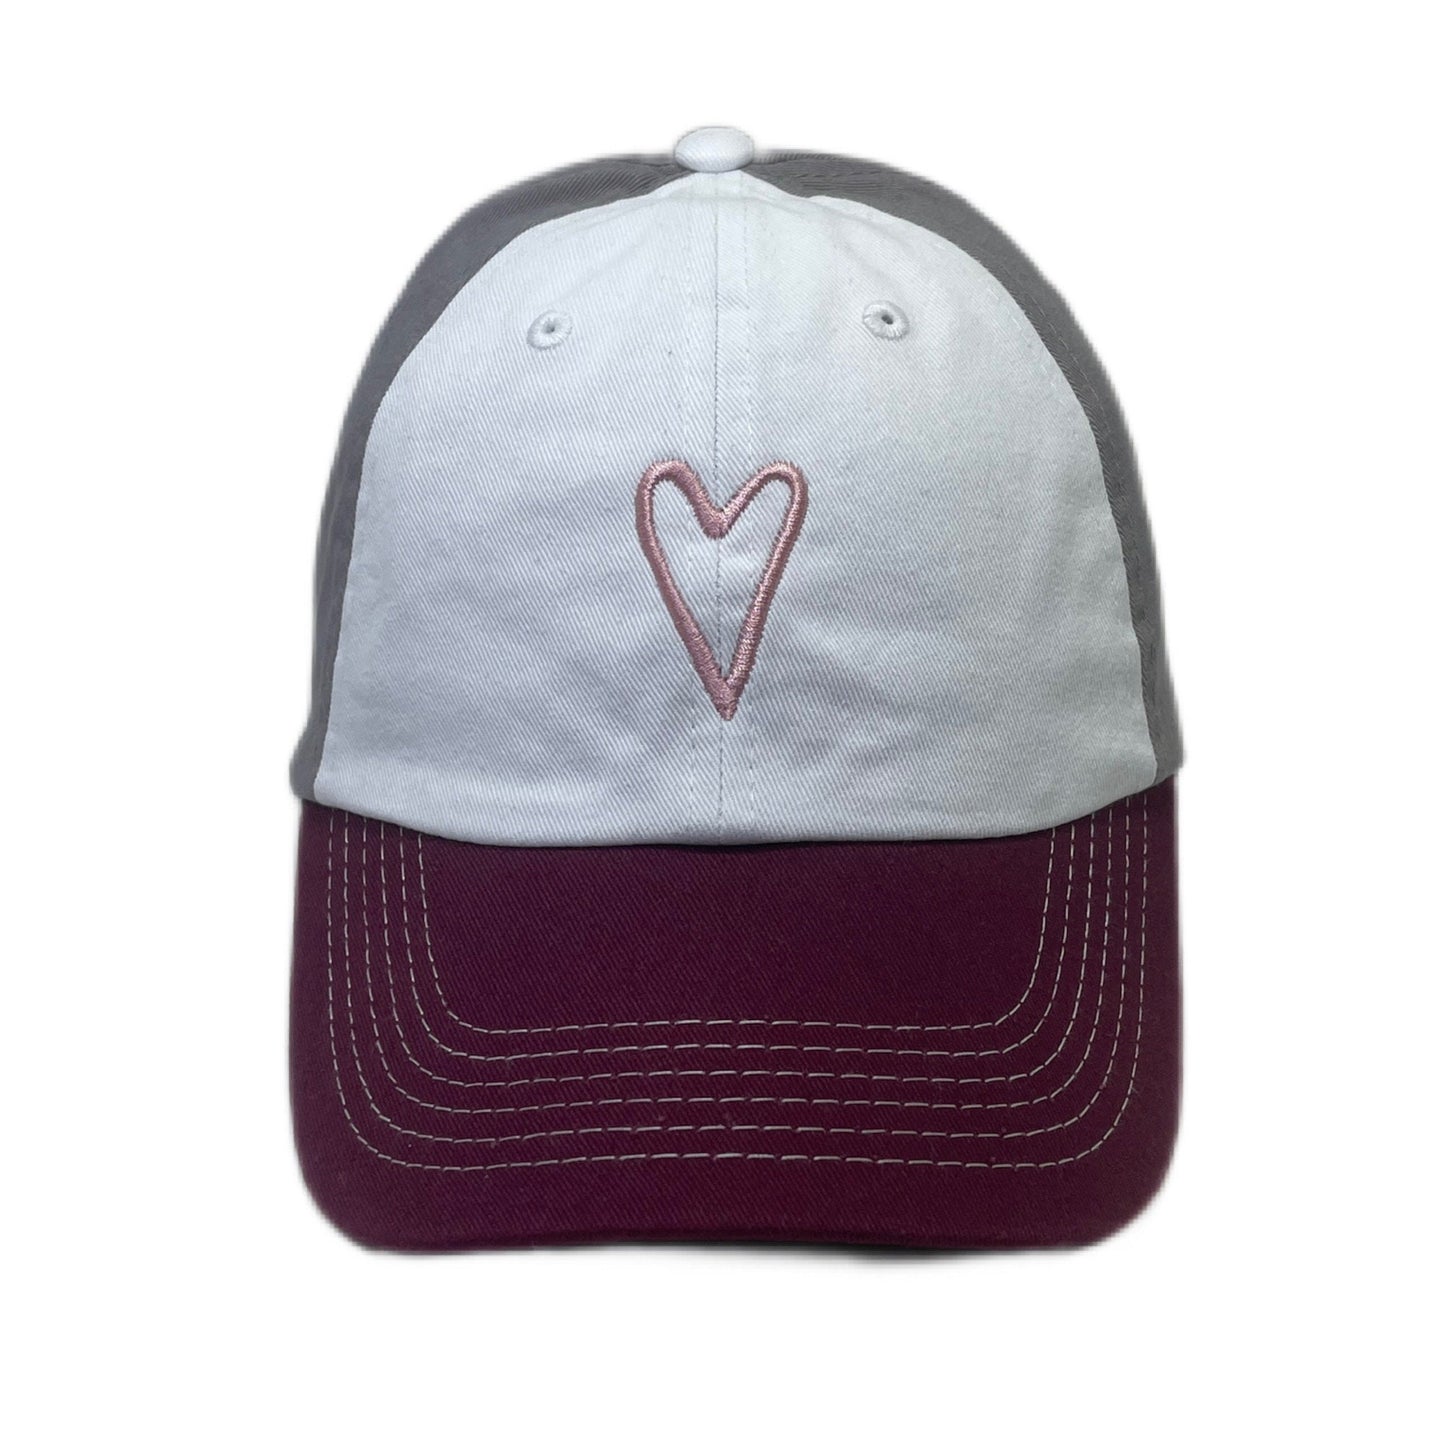 Boho Heart Dad Hat | Classic Embroidered Baseball Cap | Adjustable | Valentine's Day